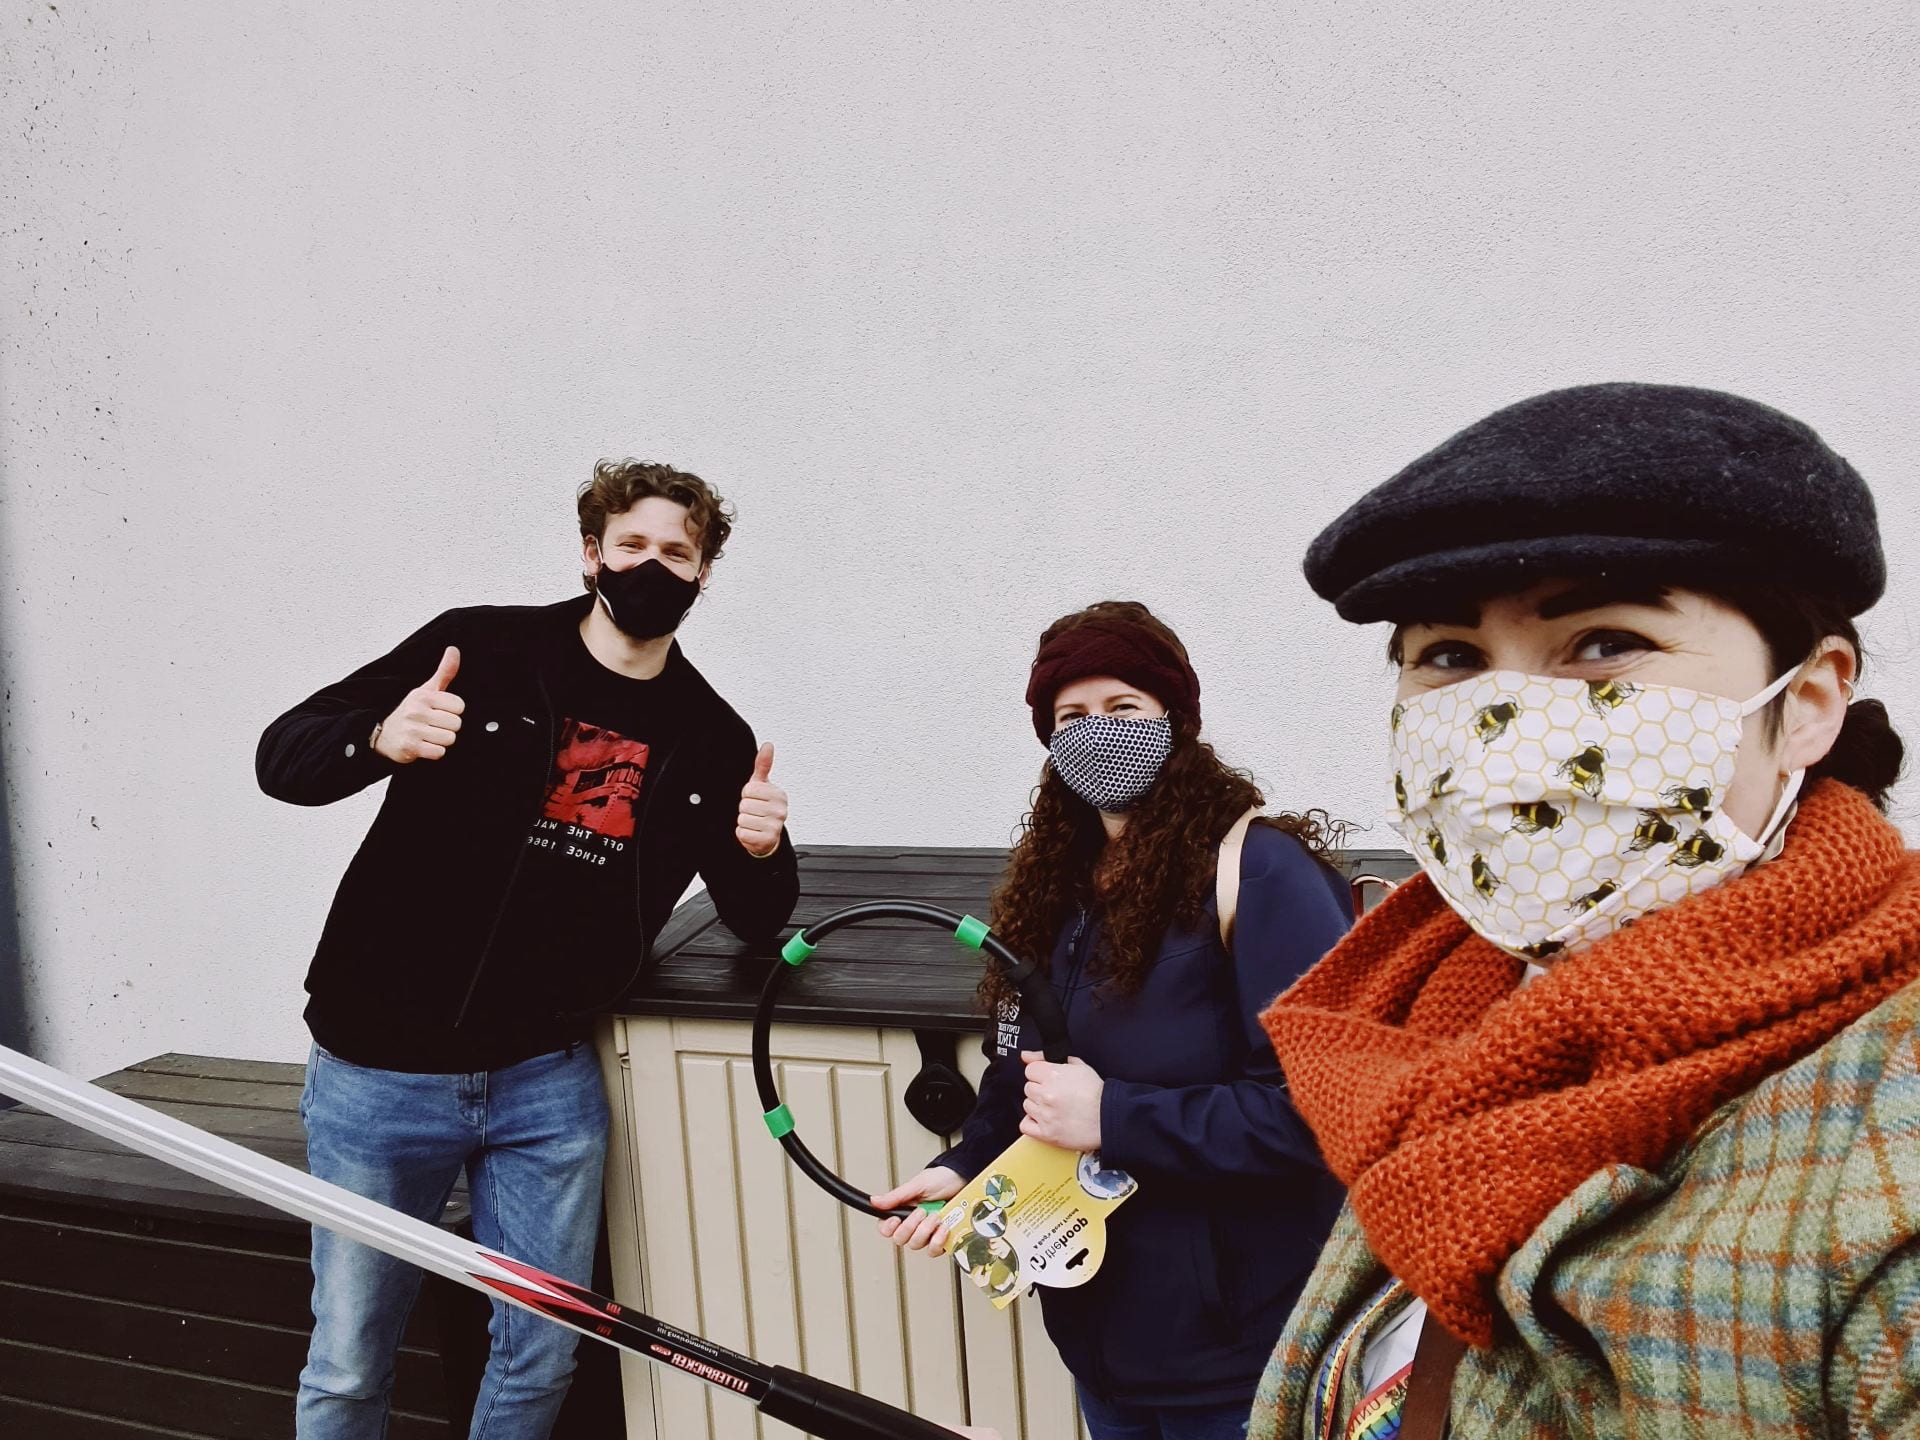 Three people hold litter picking equipment and look happy under their masks. They are socially distanced.